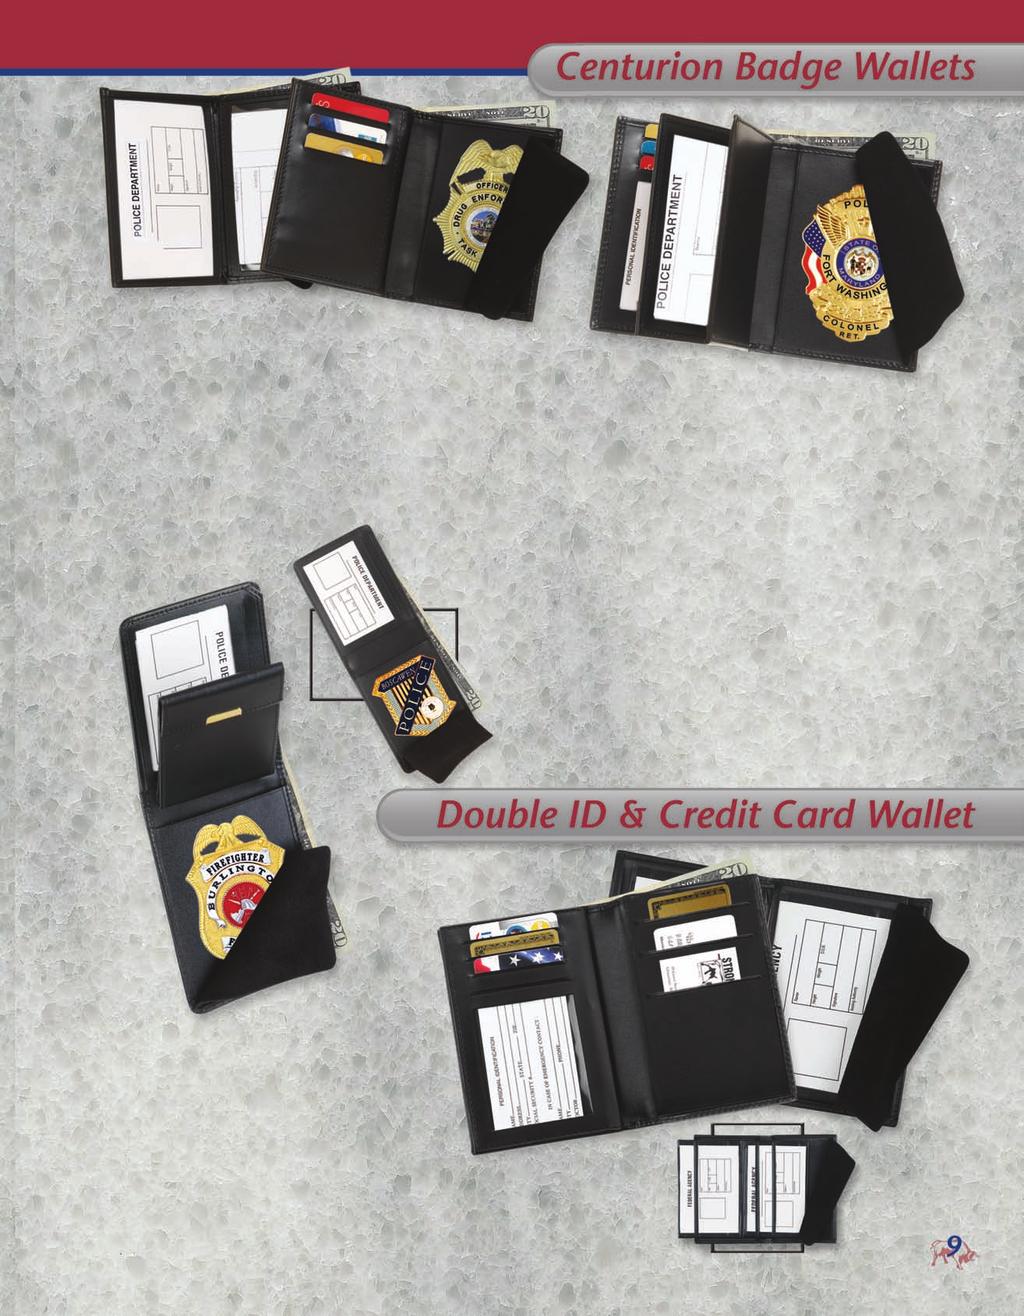 Double ID Badge Wallet Credit card slots and a money section. See model 79500 for 3 badges on page 8.